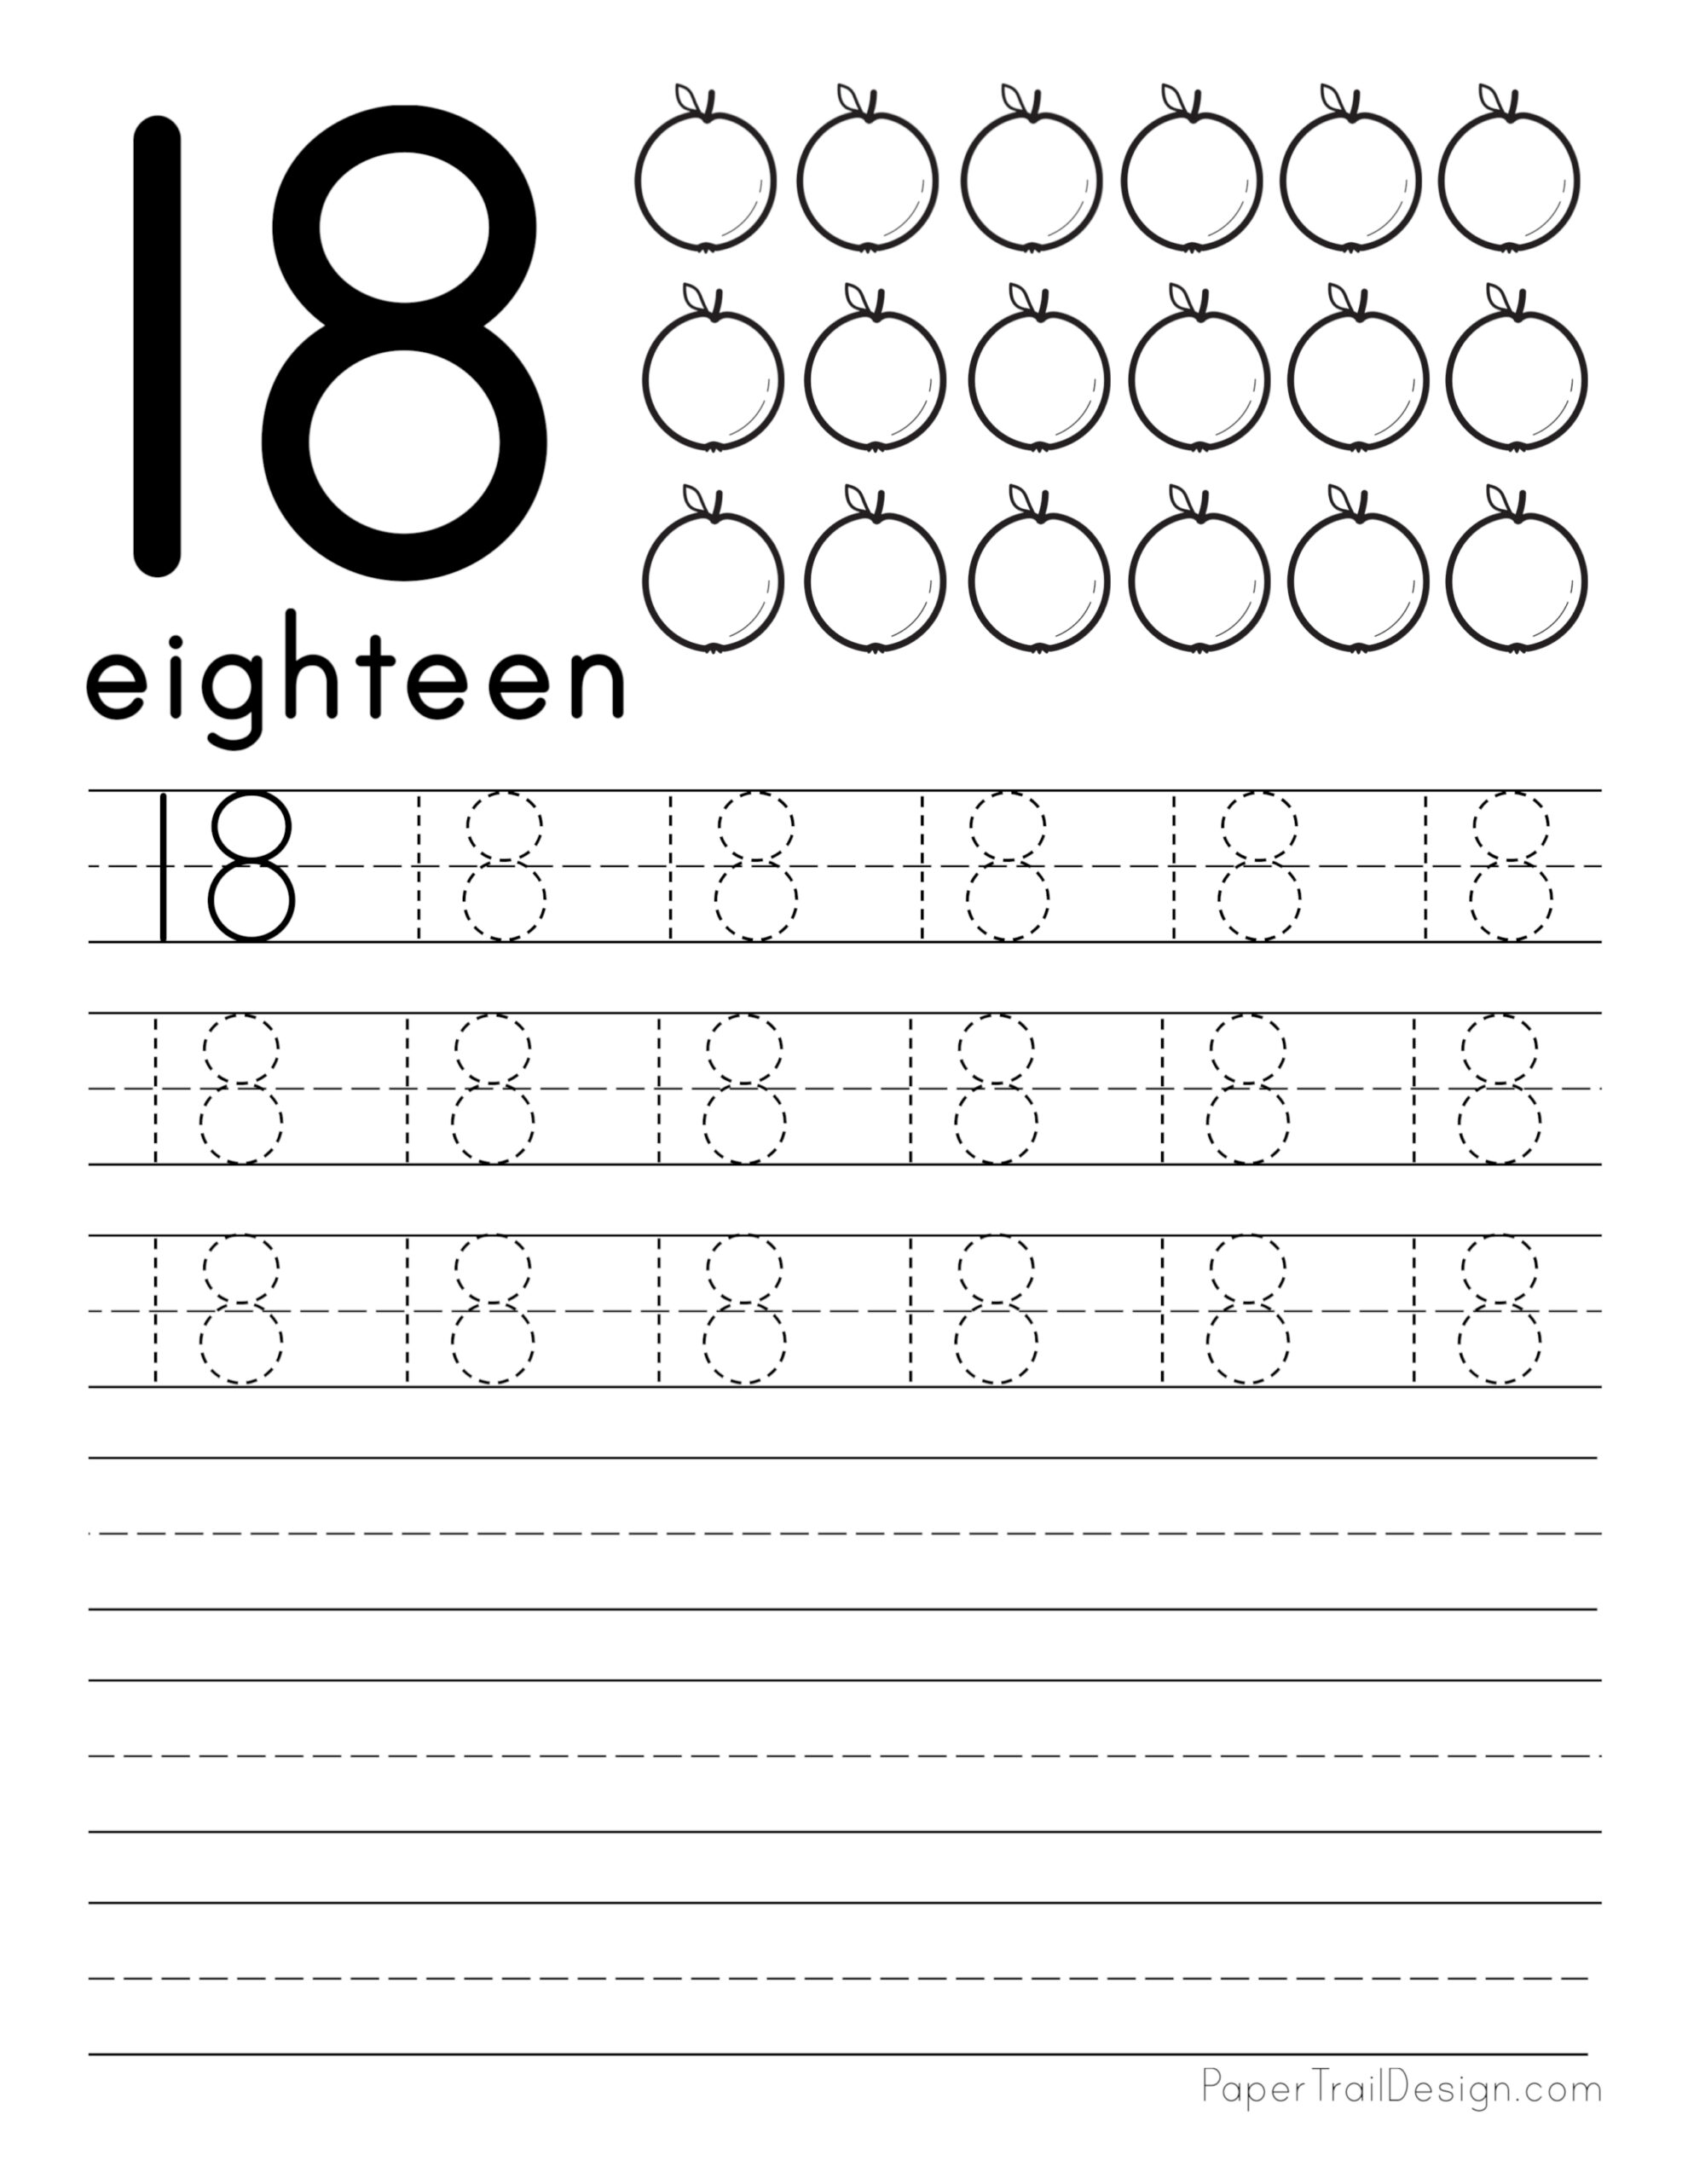 Free number tracing worksheets